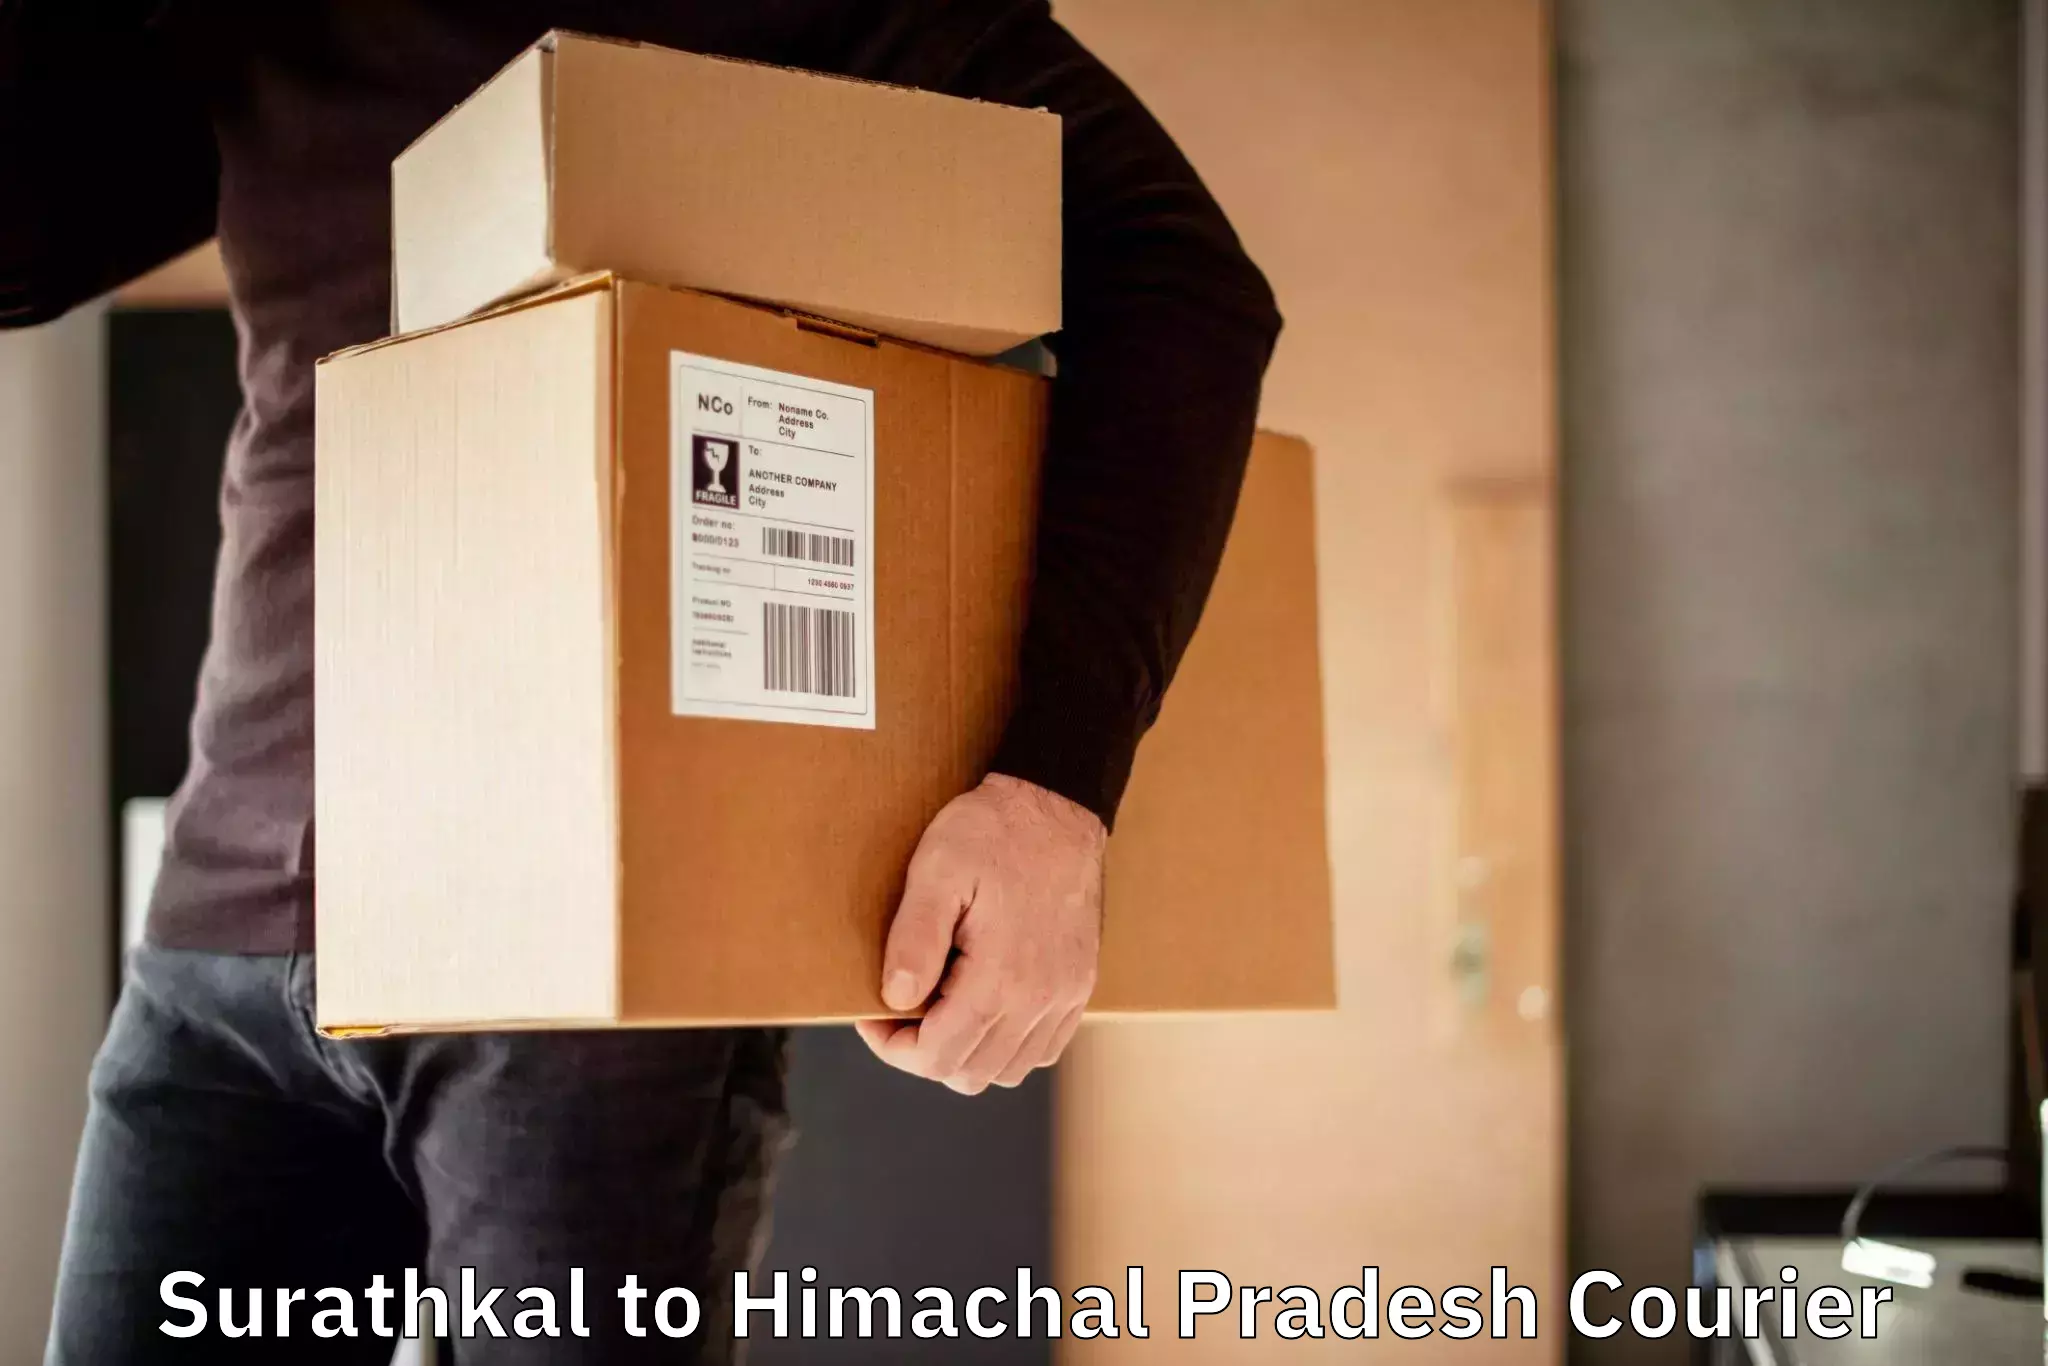 Personal courier services in Surathkal to Himachal Pradesh